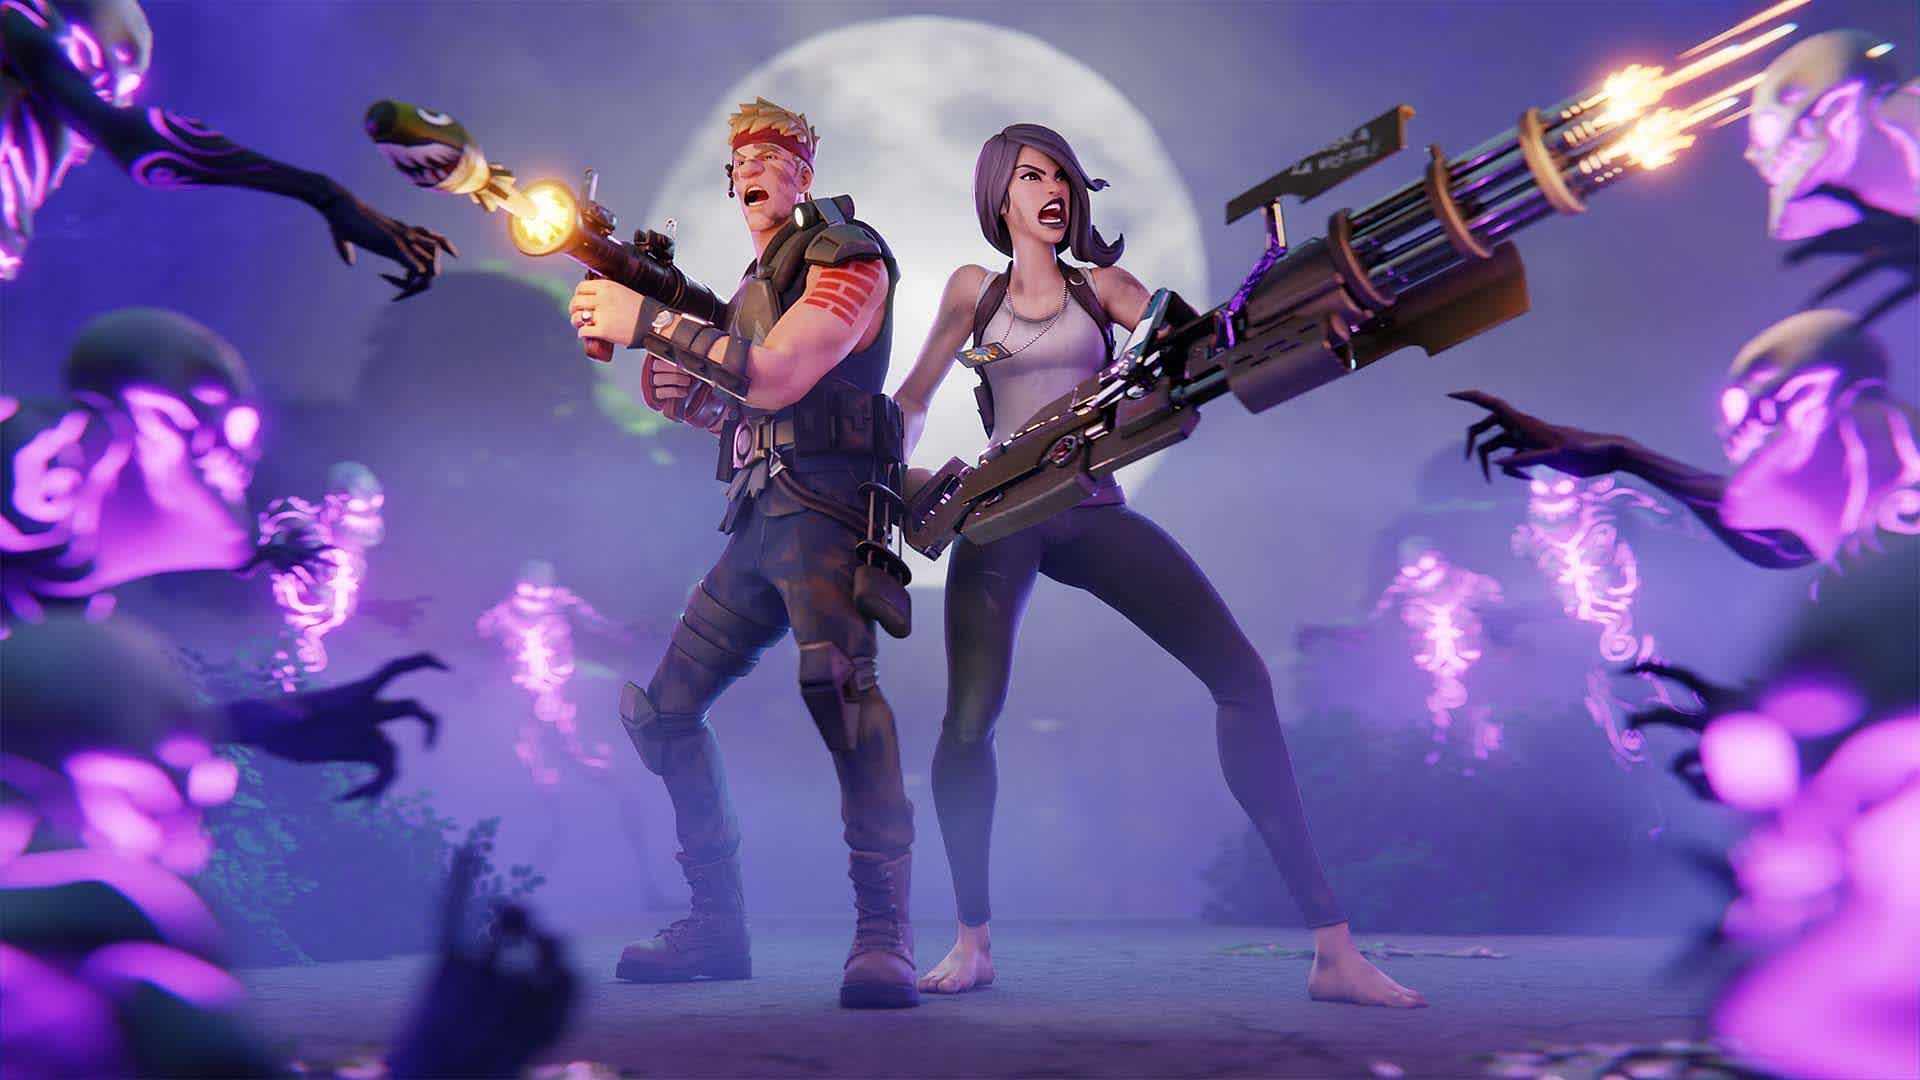 Fortnite was the Most Downloaded Free Game on PlayStation in April